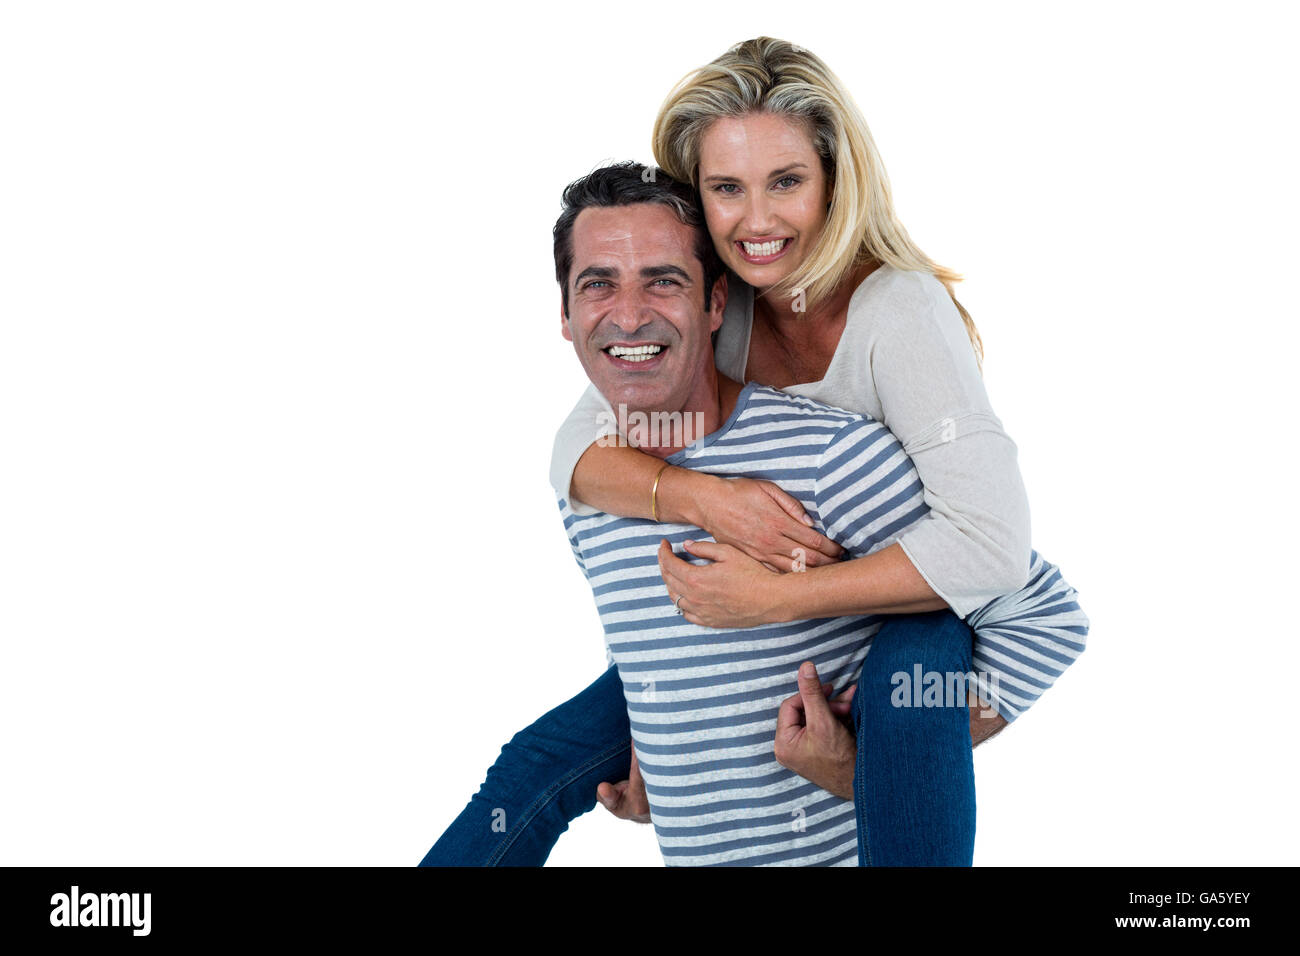 Mid adult man carrying woman piggyback Banque D'Images